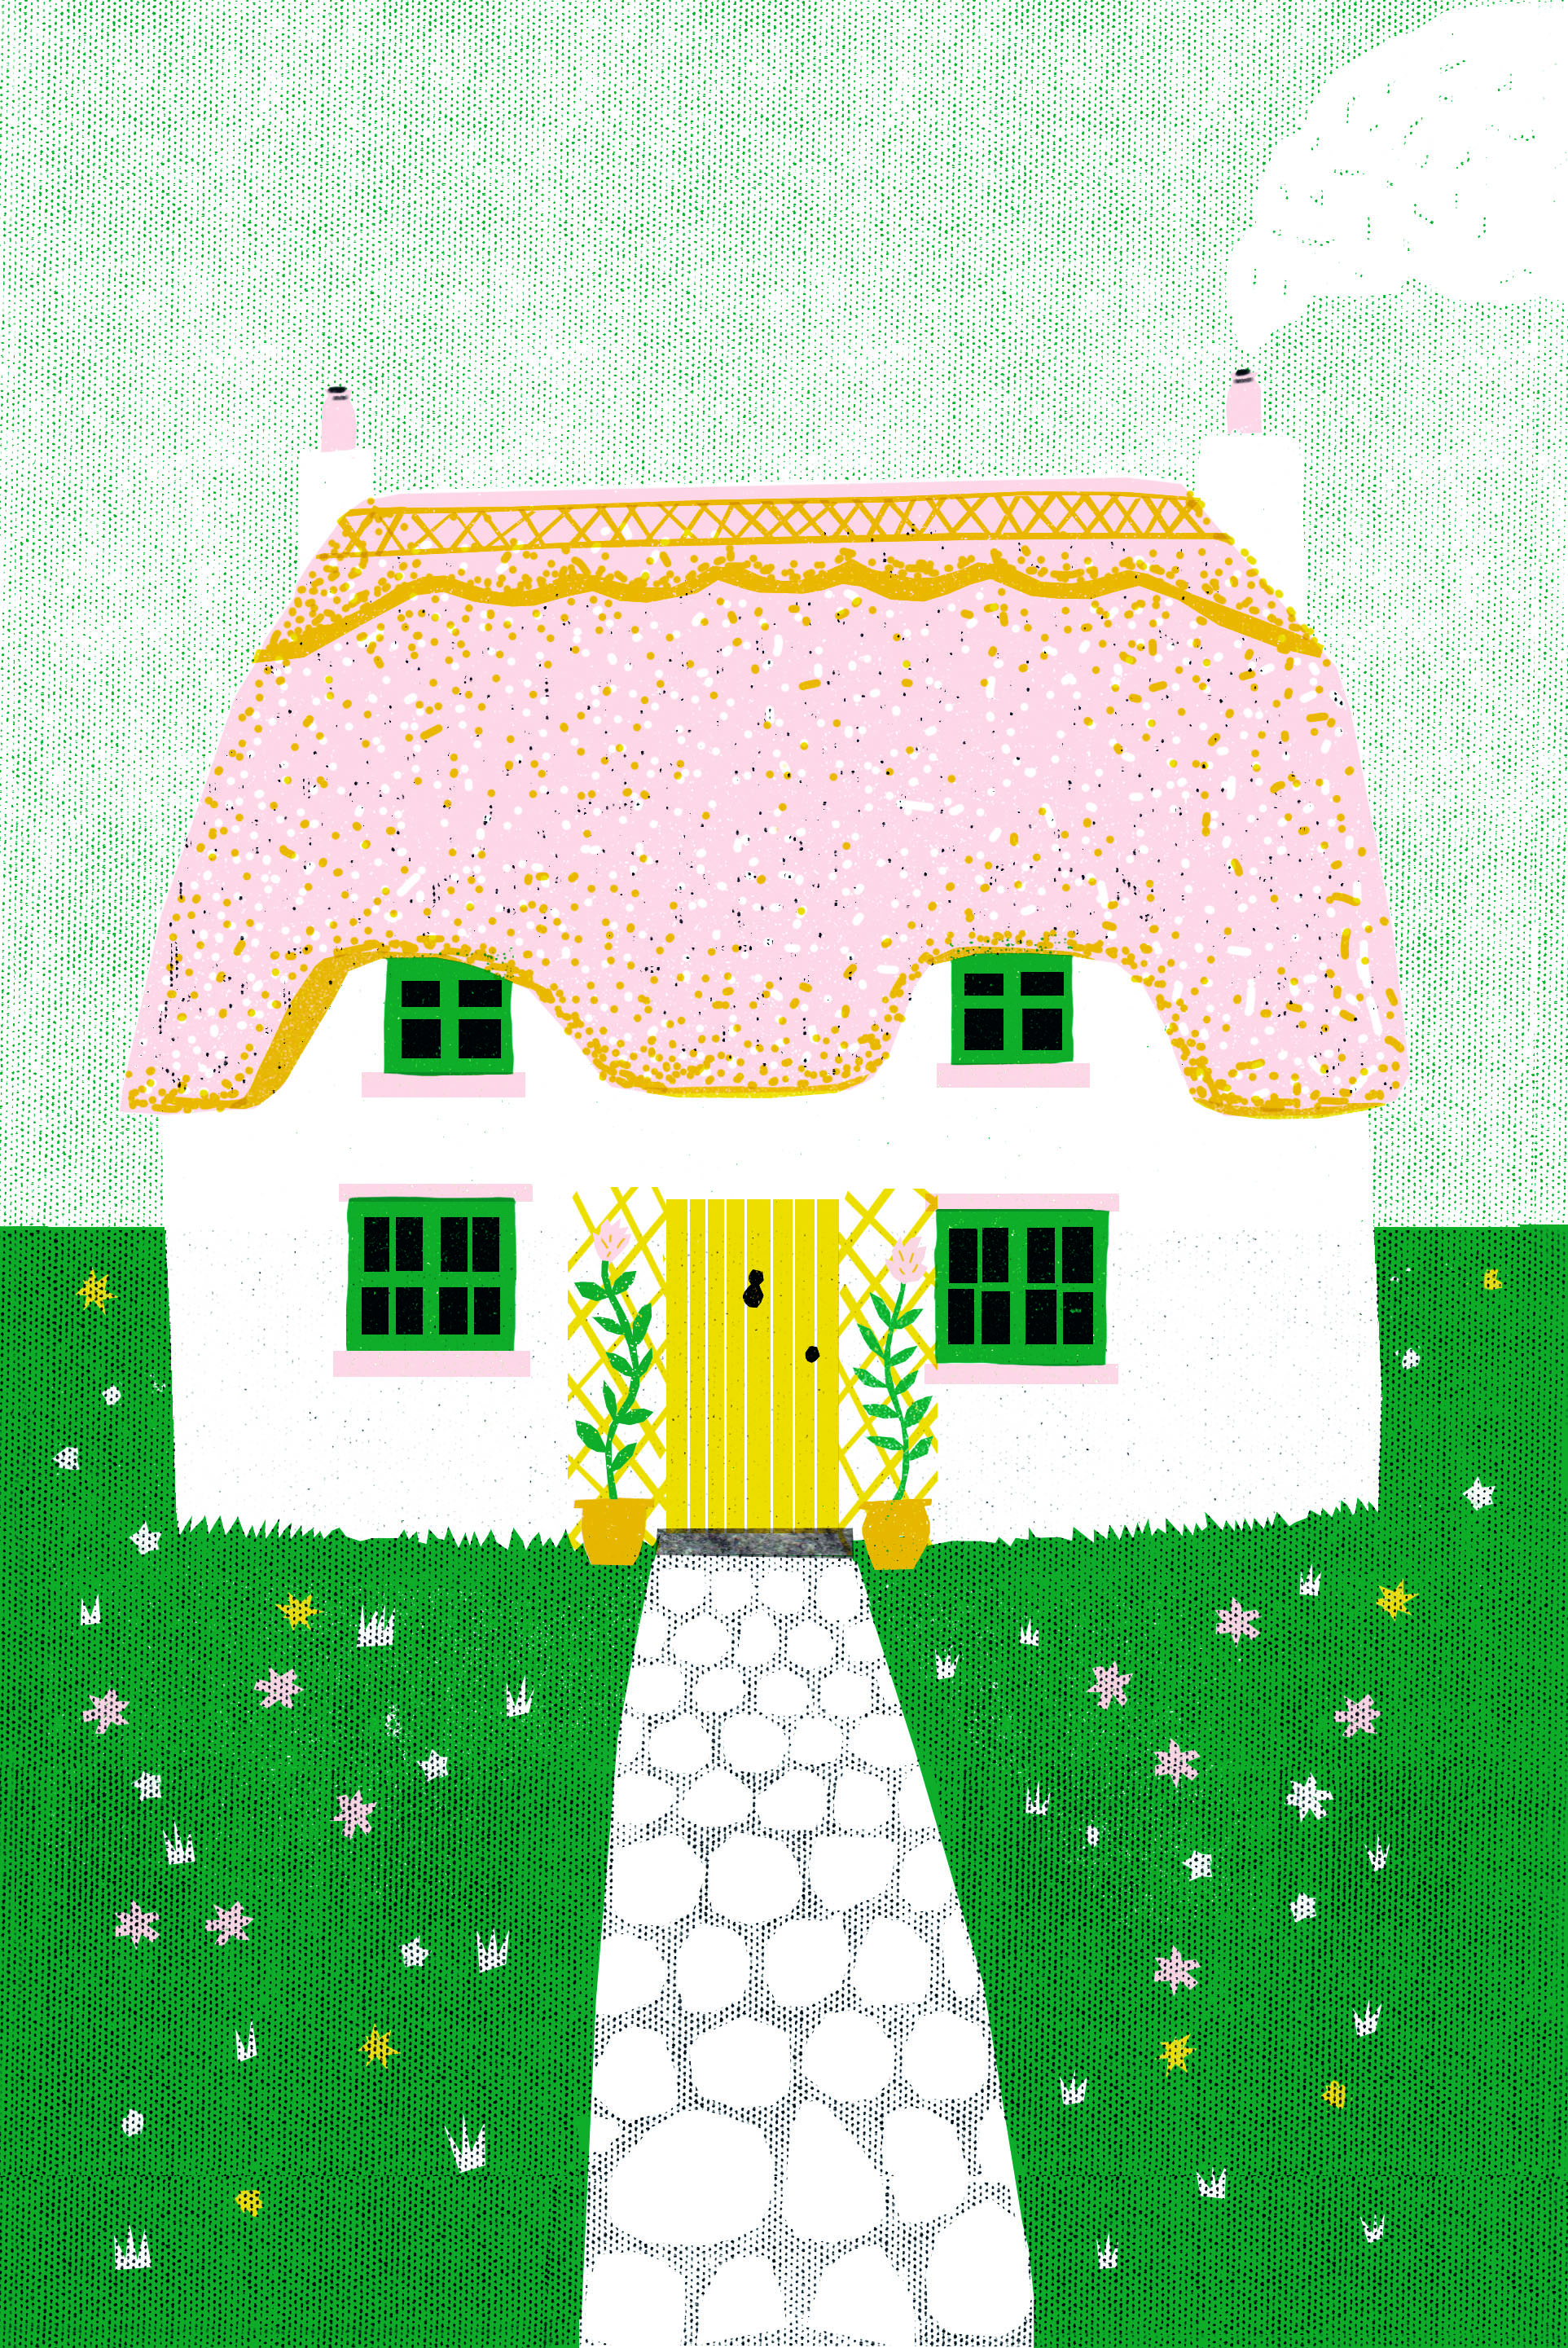 thatch scene illustration by Louise Lockhart for Crafted book